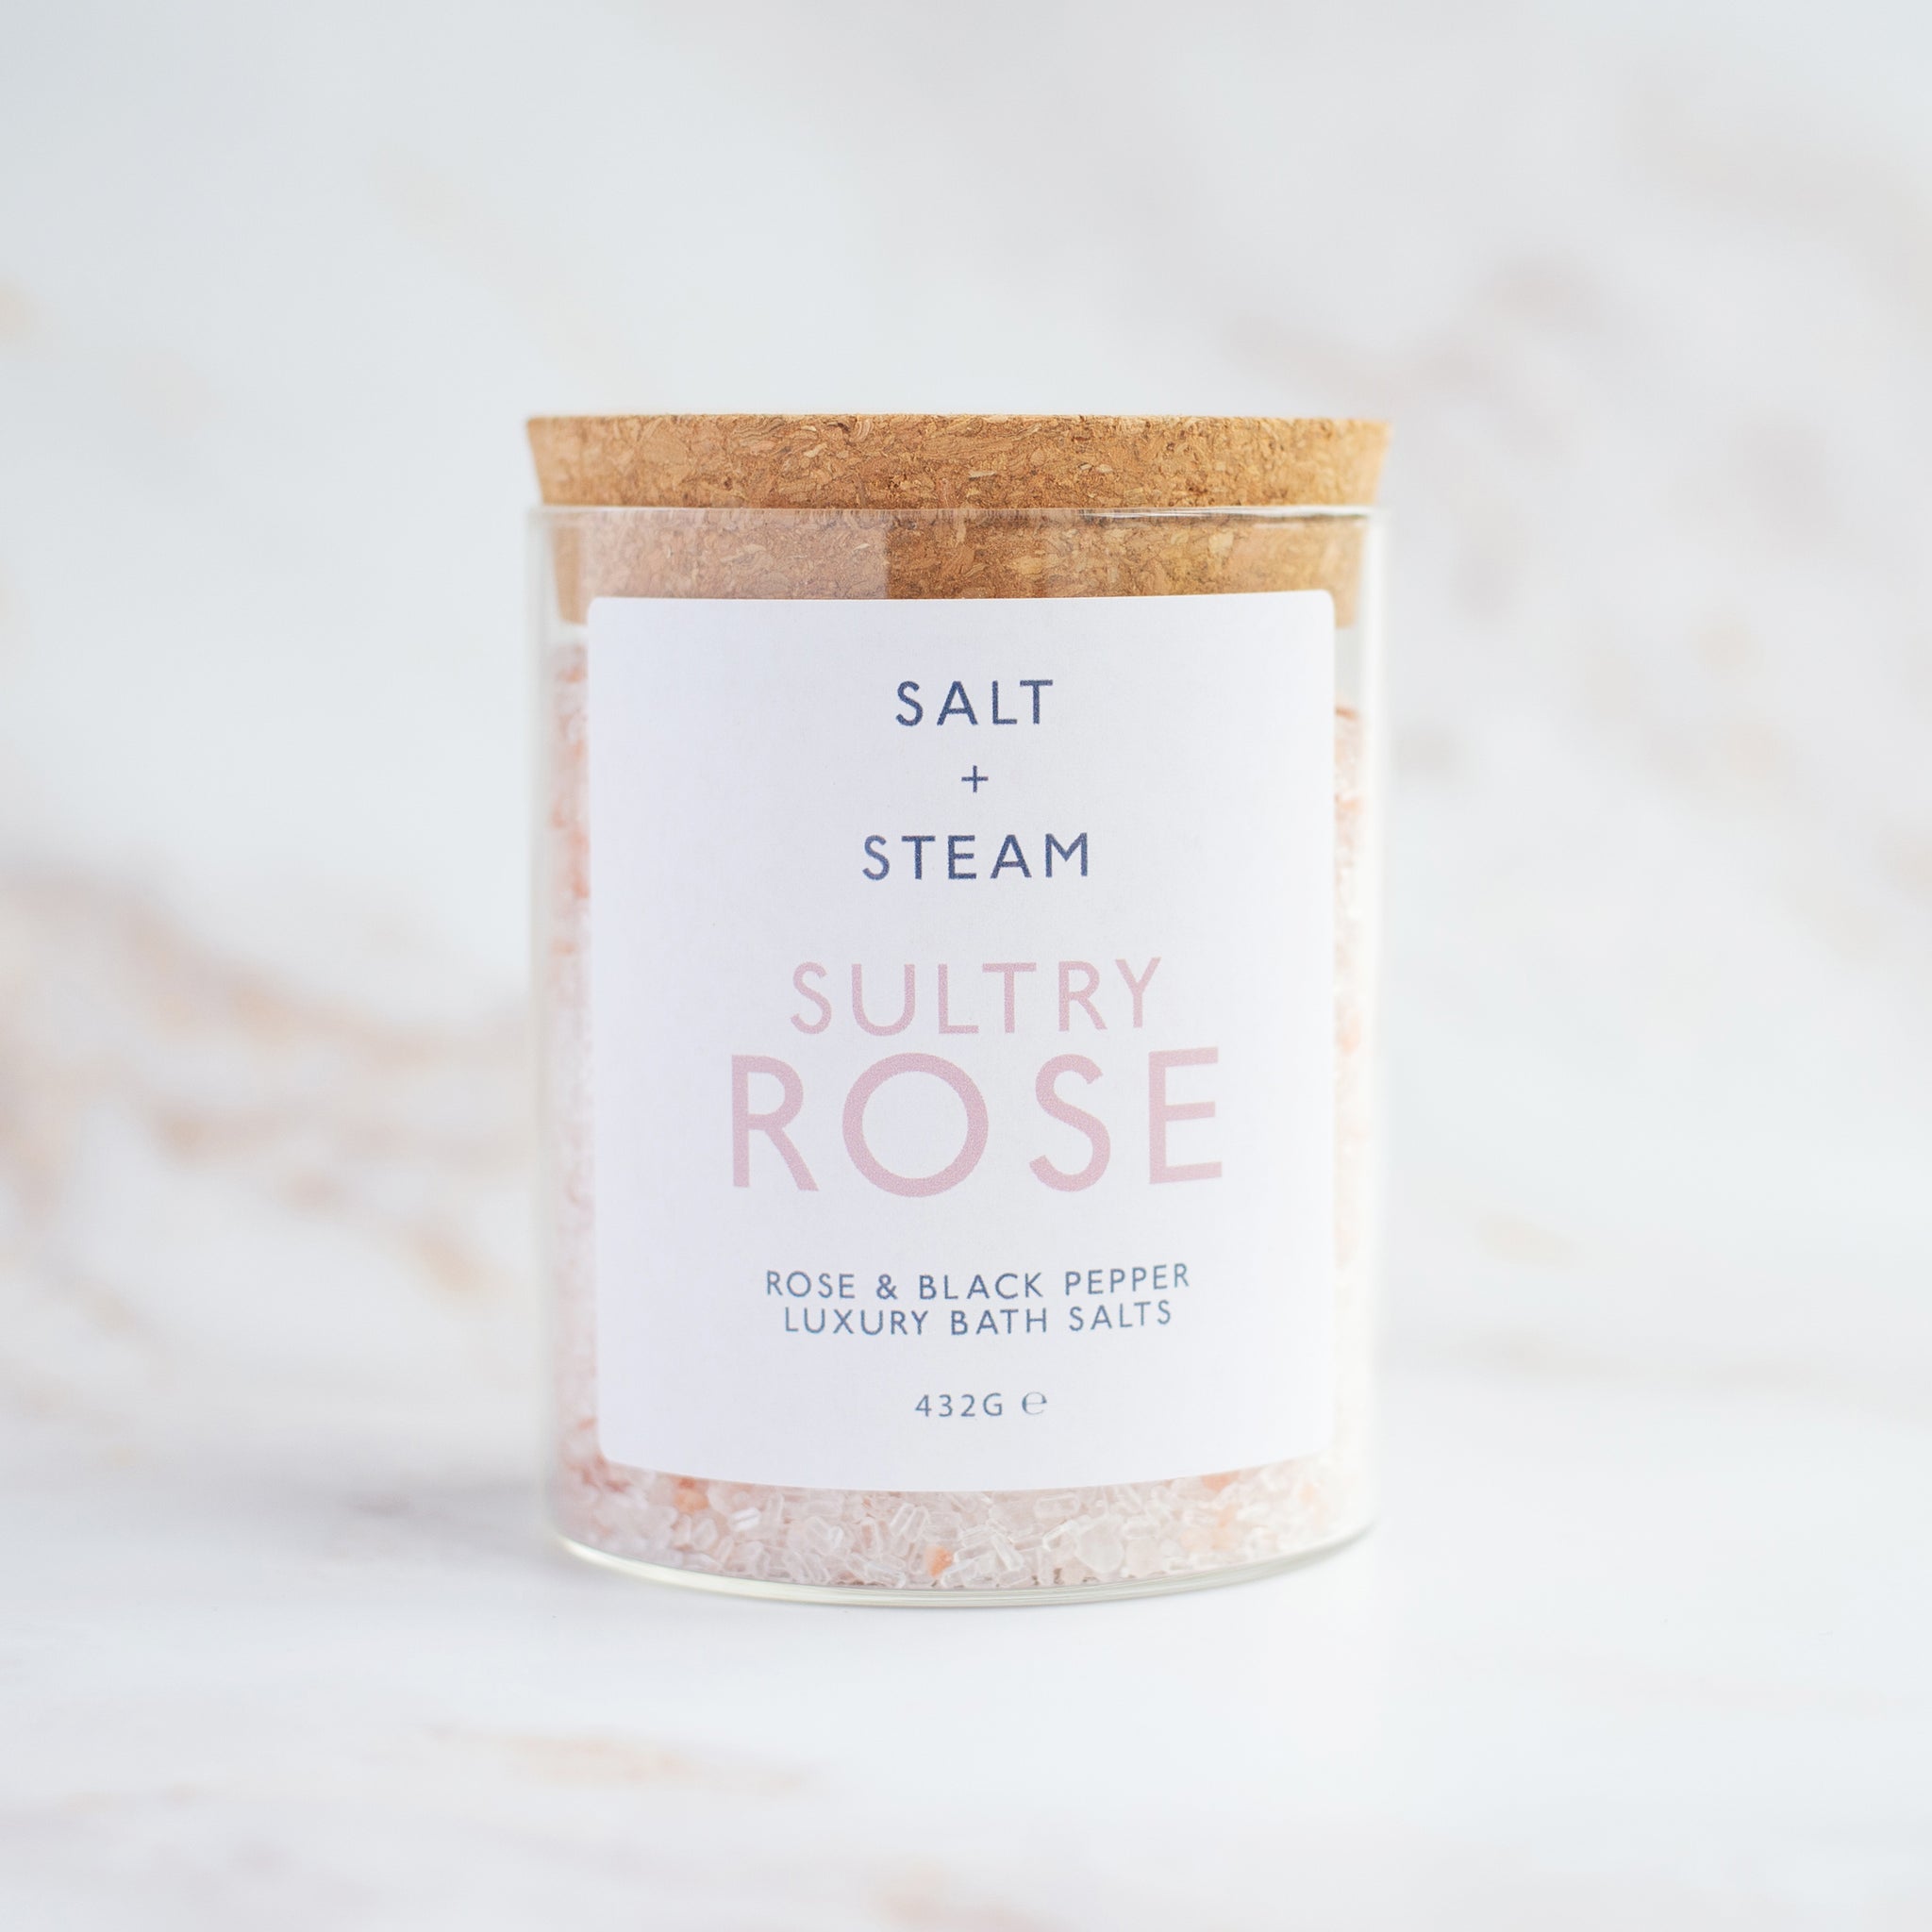 'Sultry Rose' Bath Salts